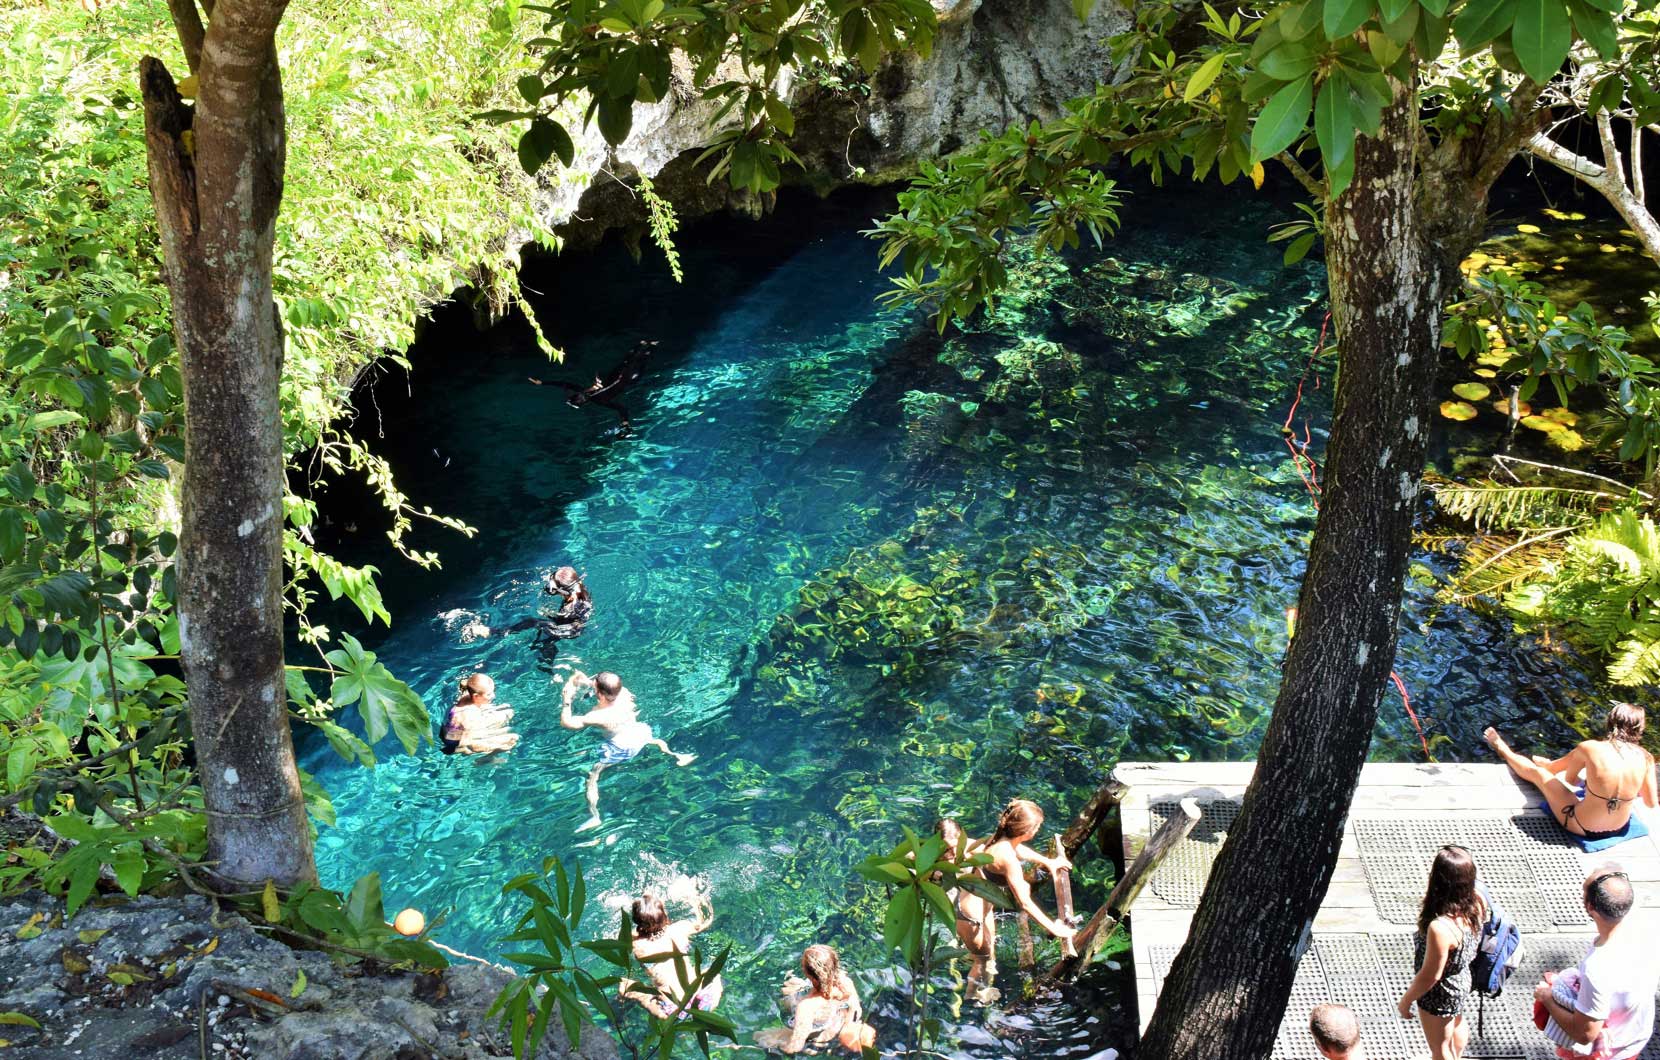 Today, cenotes are a popular destination for scuba divers, swimmers, and tourists.